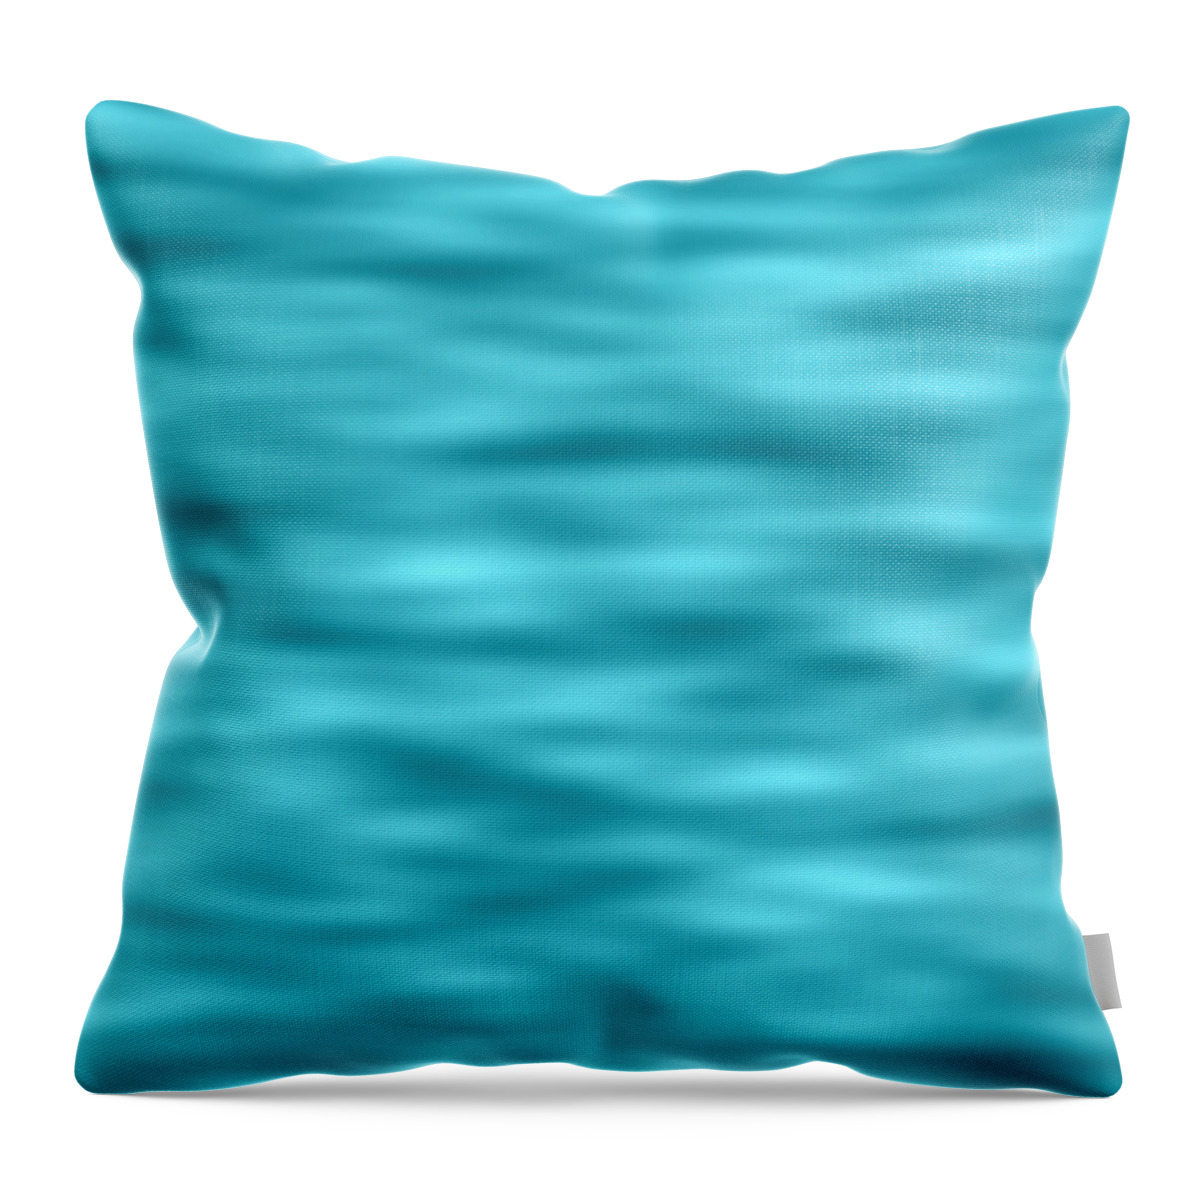 Background Throw Pillow featuring the digital art Troubled waters blue texture background by Valentino Visentini